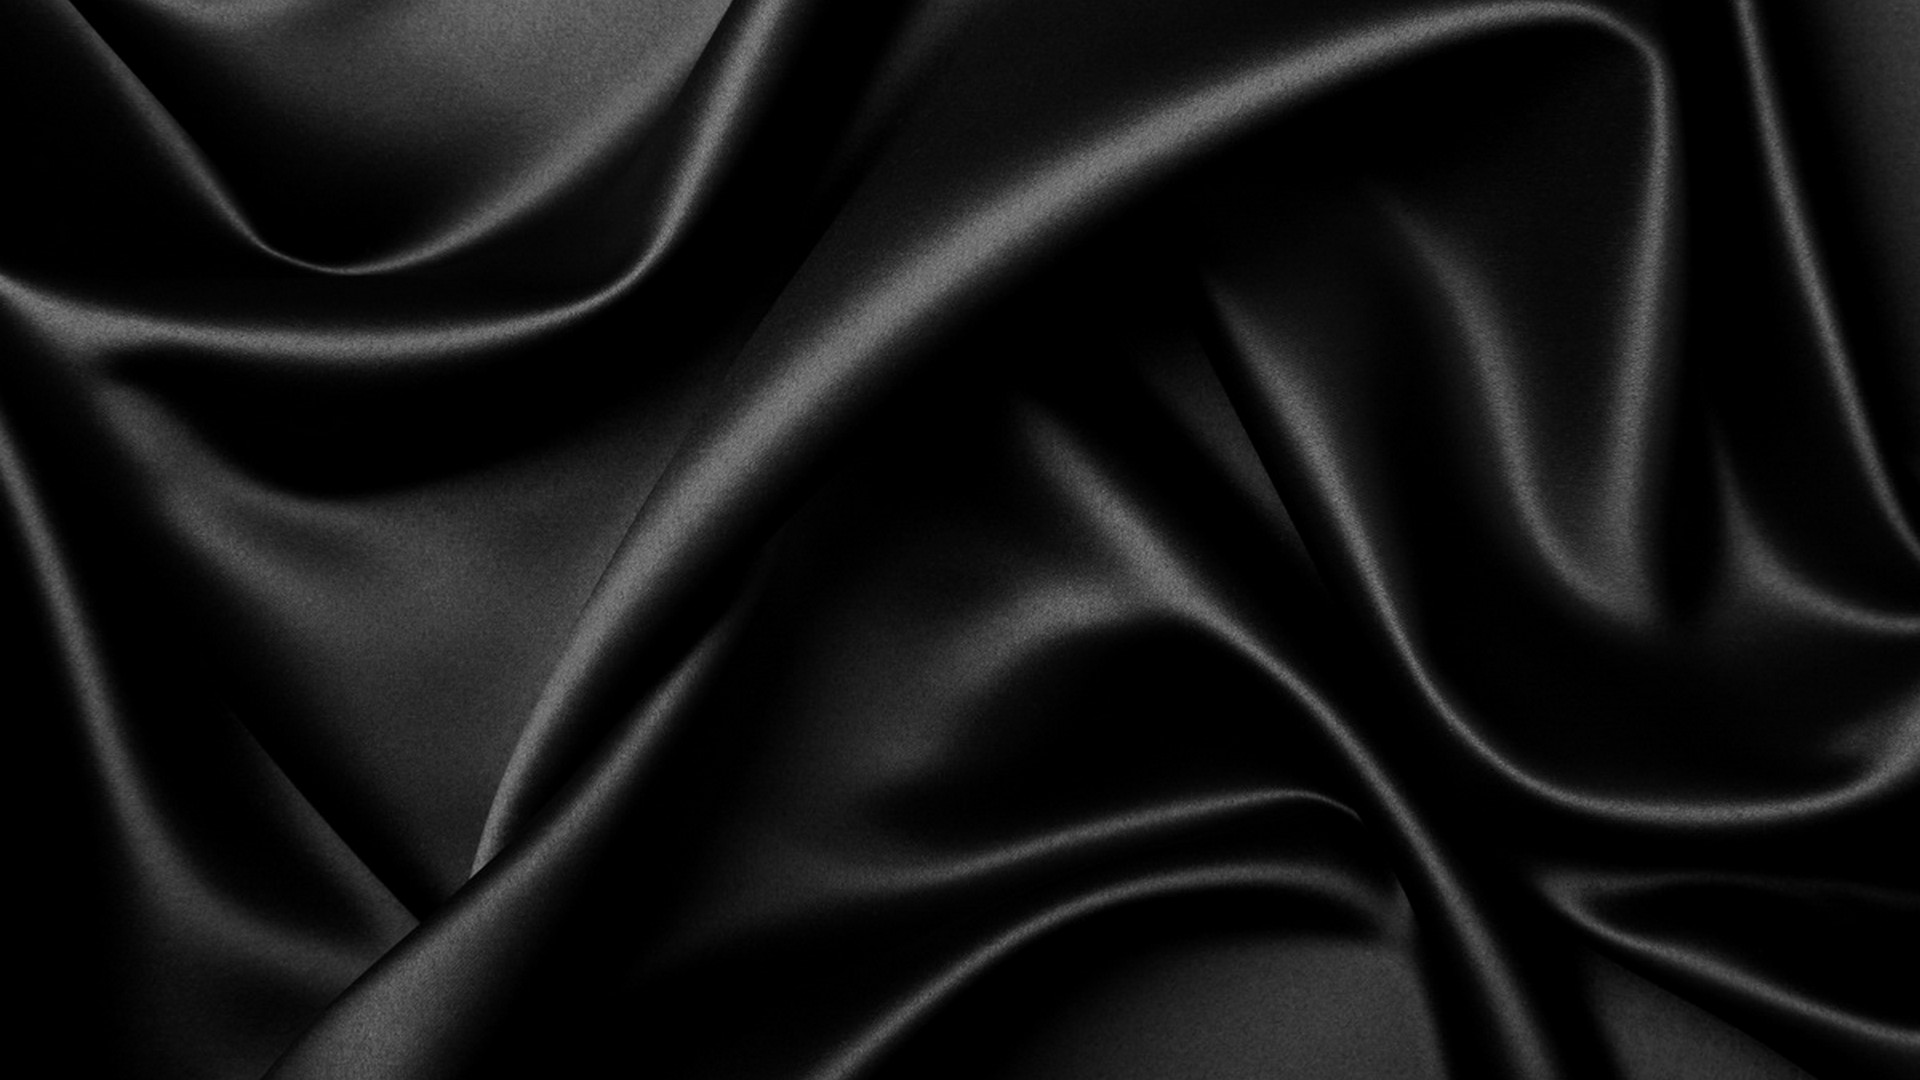 Black Silk iPhone Backgrounds with high-resolution 1920x1080 pixel. You can set as wallpaper for Apple iPhone X, XS Max, XR, 8, 7, 6, SE, iPad. Enjoy and share your favorite HD wallpapers and background images